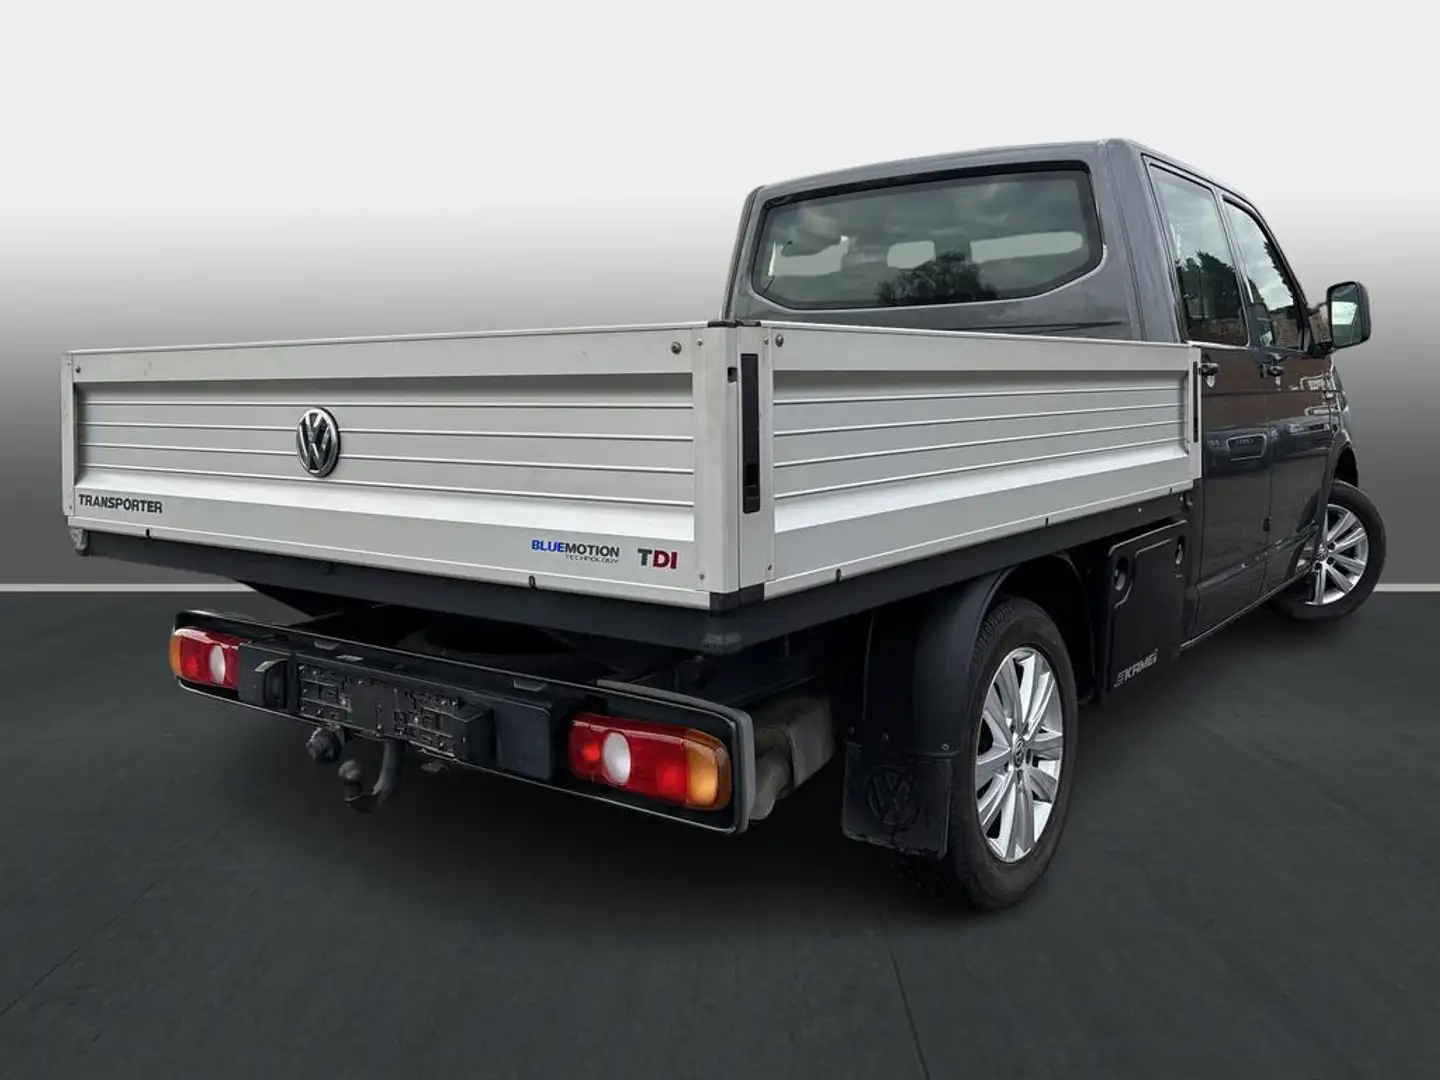 Volkswagen T6 Transporter Transporter chassis double cab, wheelbase: 3 400 m Grey - 2